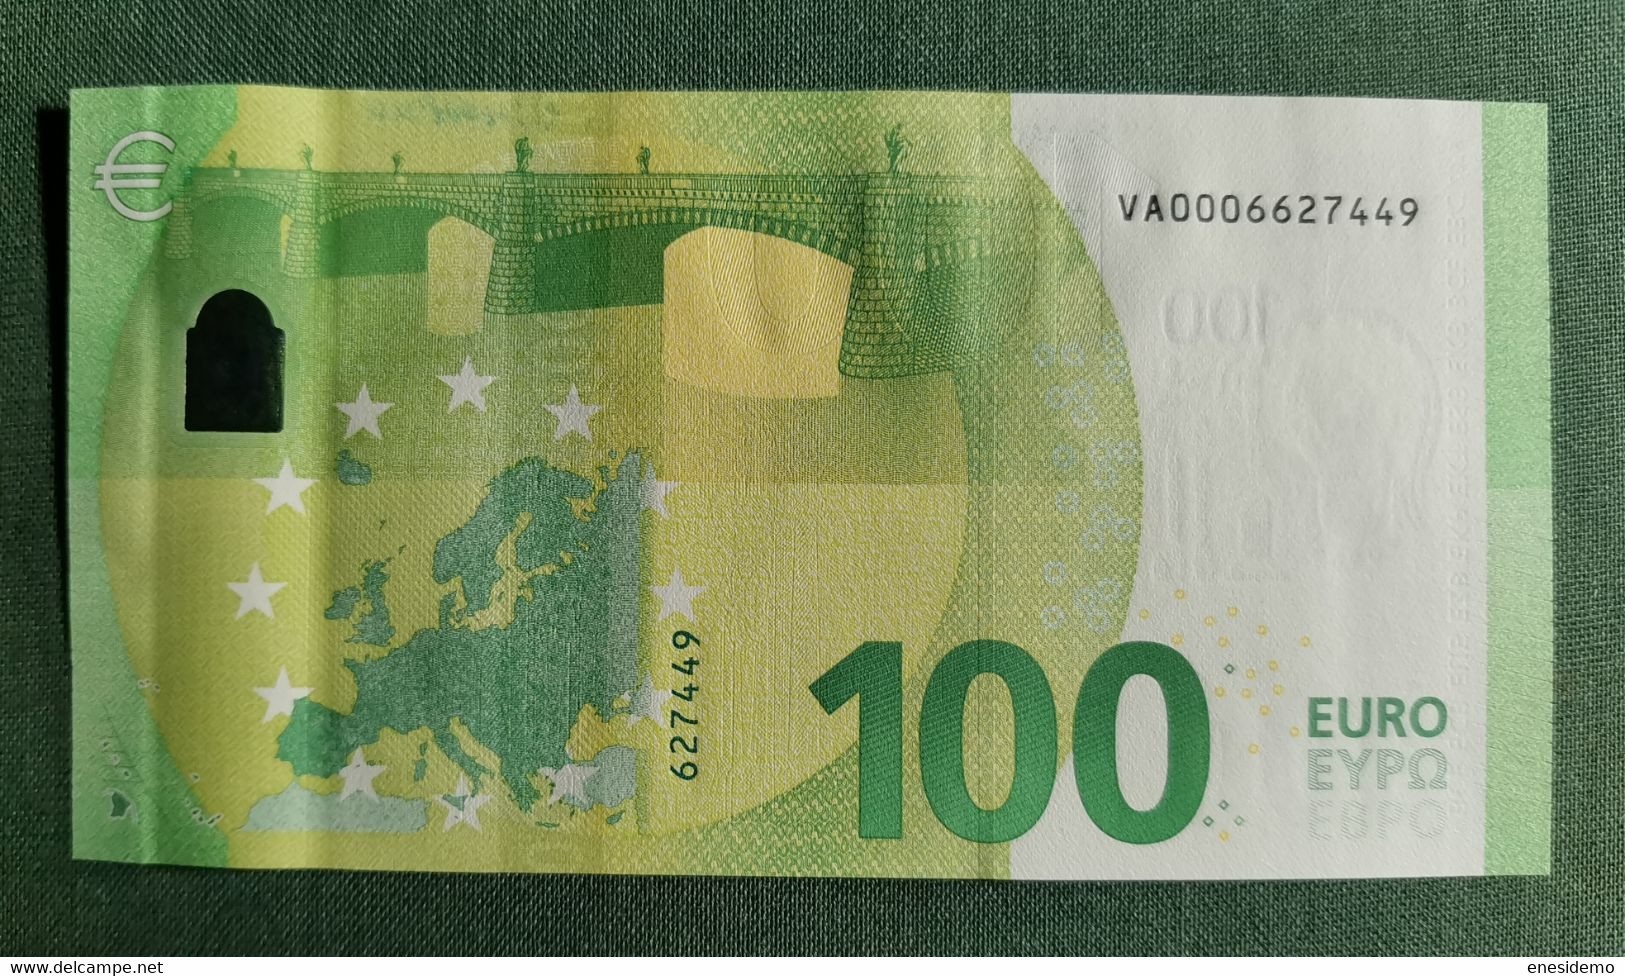 100 EURO SPAIN 2019 DRAGHI V001B4 VA000 LOW SERIAL NUMBER SC FDS UNCIRCULATED  PERFECT - 100 Euro